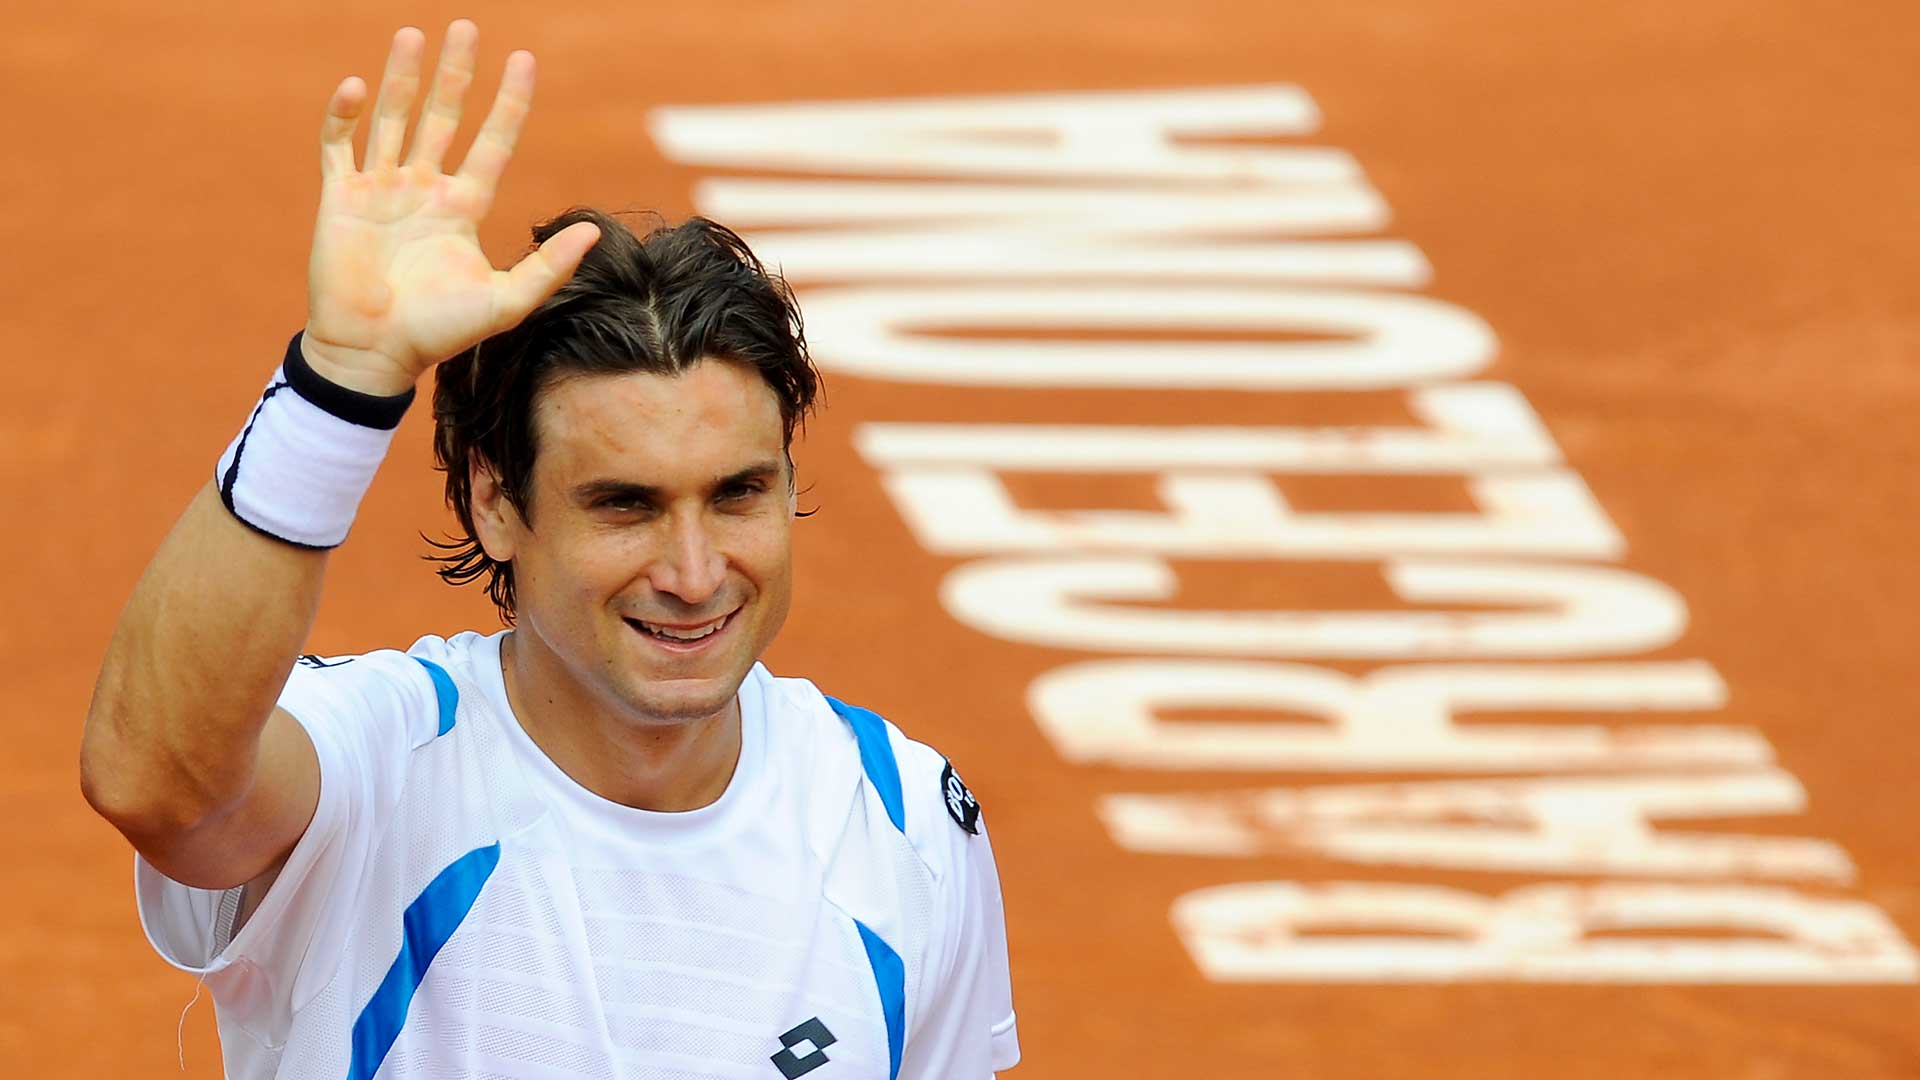 David Ferrer finished his playing career with a 30-15 record in Barcelona.